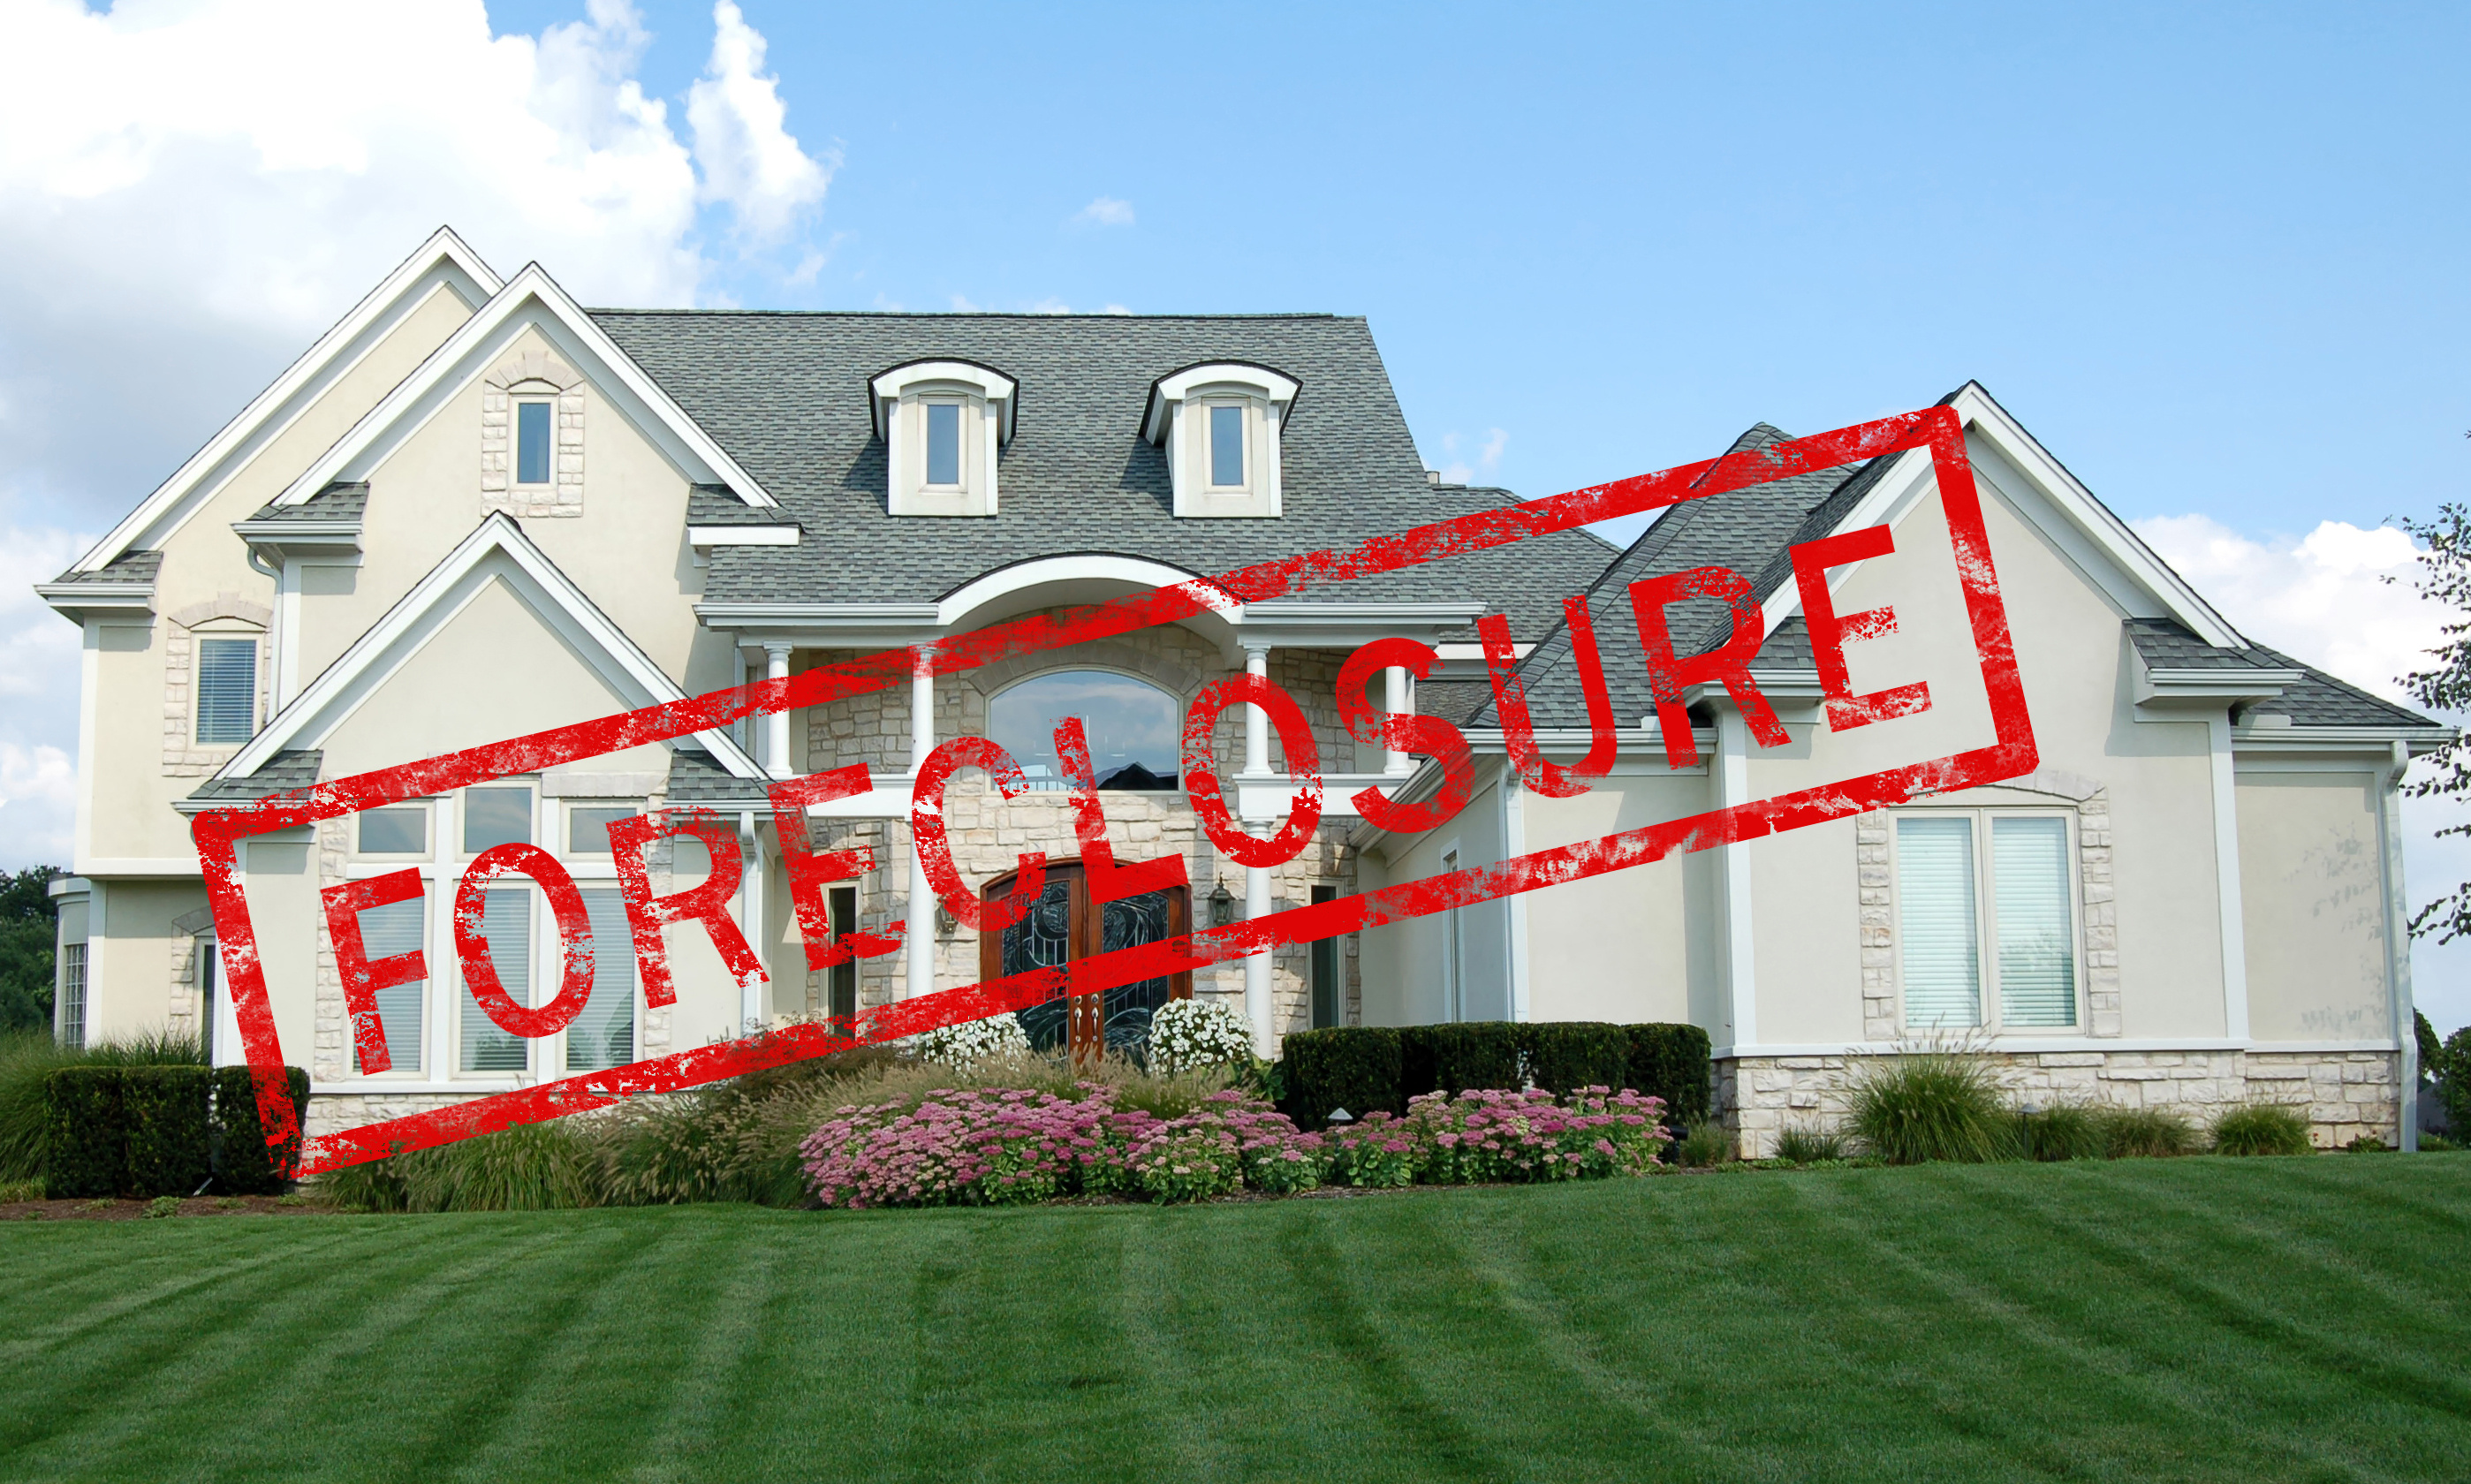 Call Shamrock Appraisals, Inc. when you need valuations pertaining to Tuscaloosa foreclosures